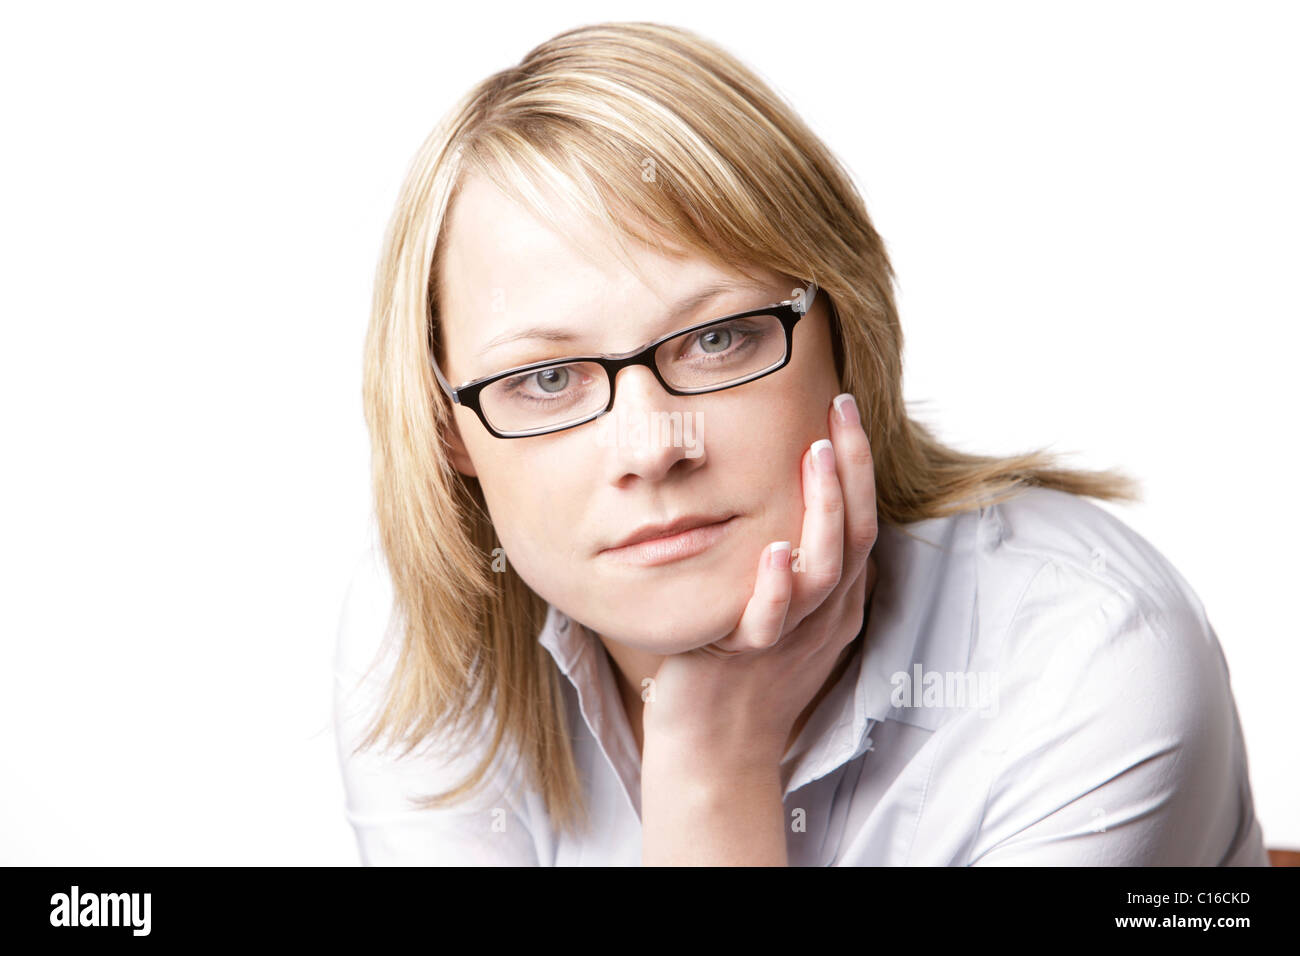 Blonde Woman Wearing A White Blouse And Glasses Stock Photo Alamy